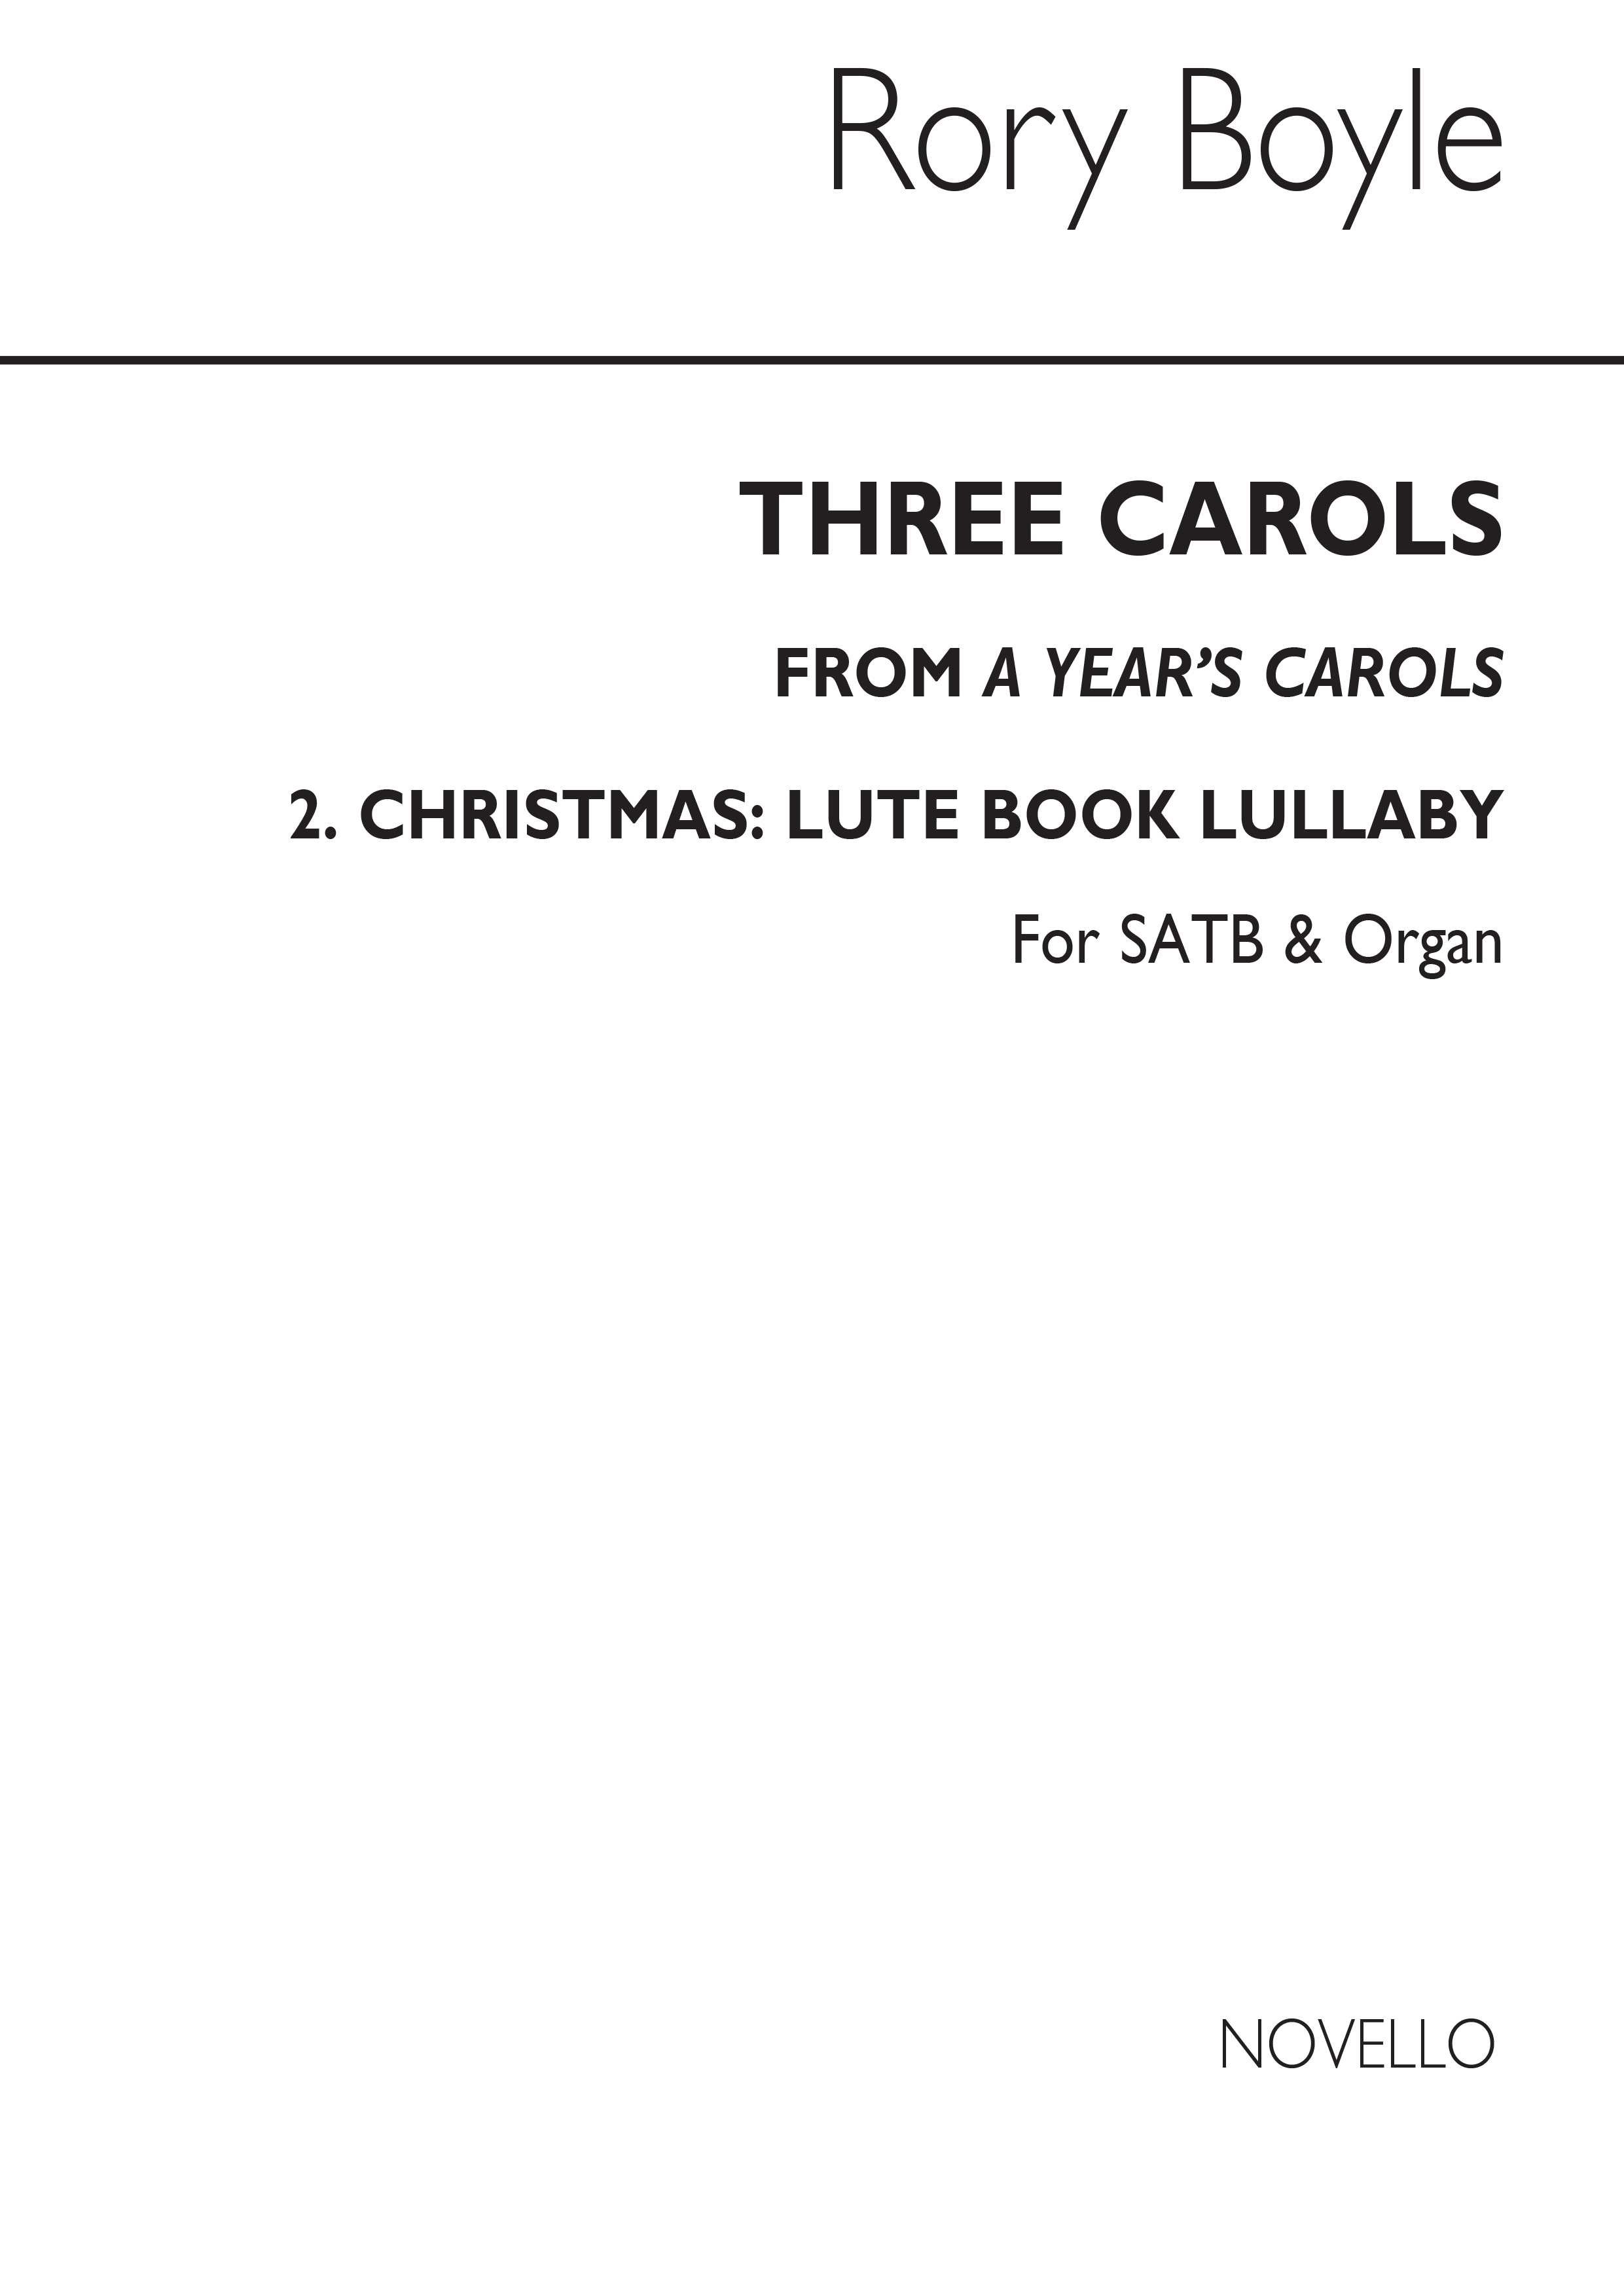 Rory Boyle: A Year's Carols No.2 - Lute Book Lullaby: SATB: Vocal Score